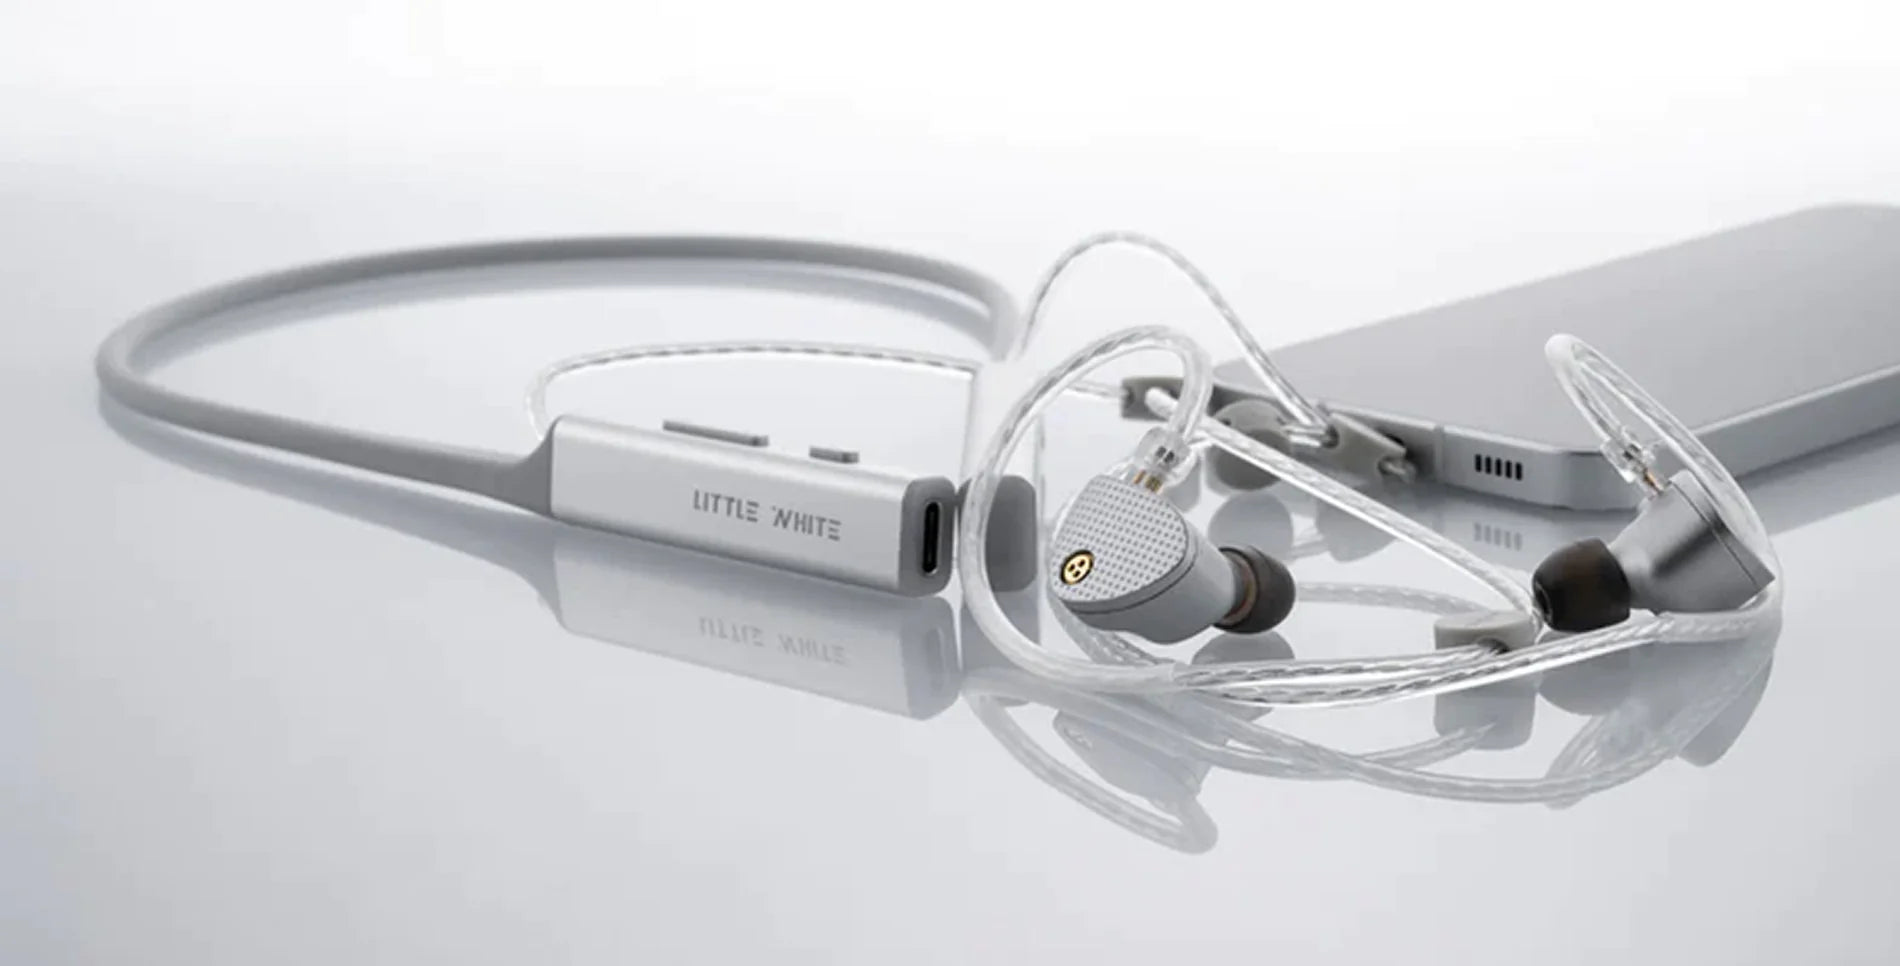 A sequel release, ARIA 2!  Headphone Reviews and Discussion 